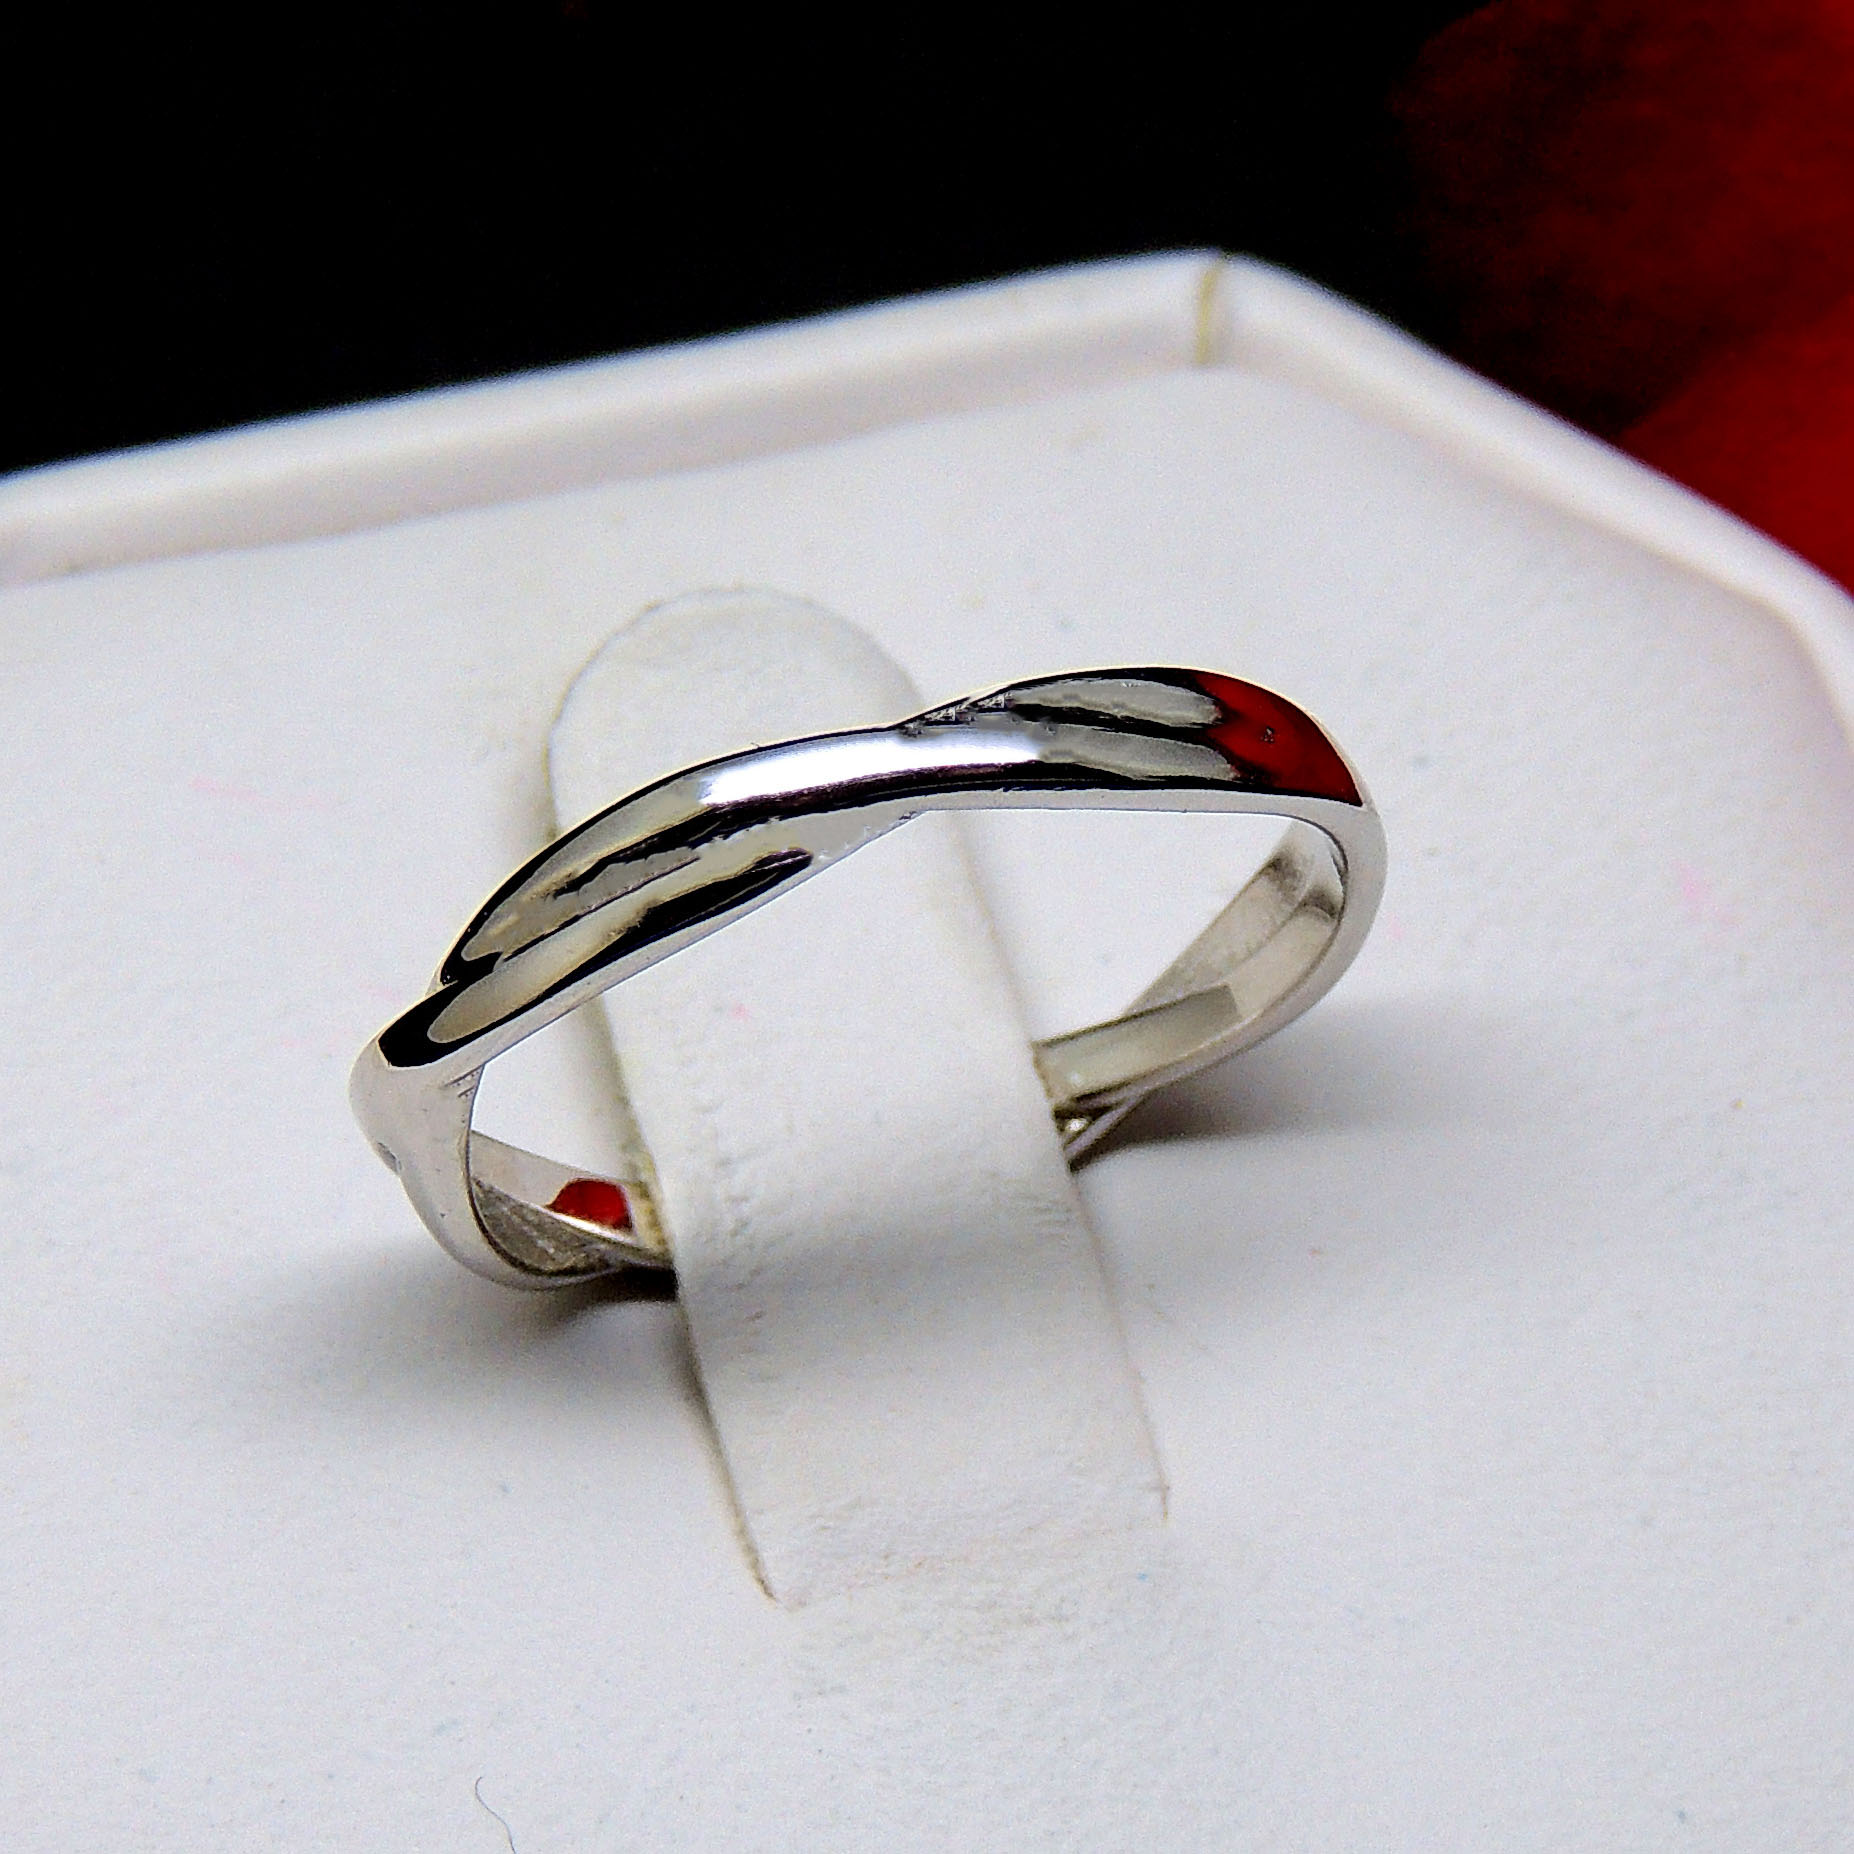 Aurora Wedding Band Ring Women Men Twist Sterling Silver Ginger Lyne Collection - image 2 of 7